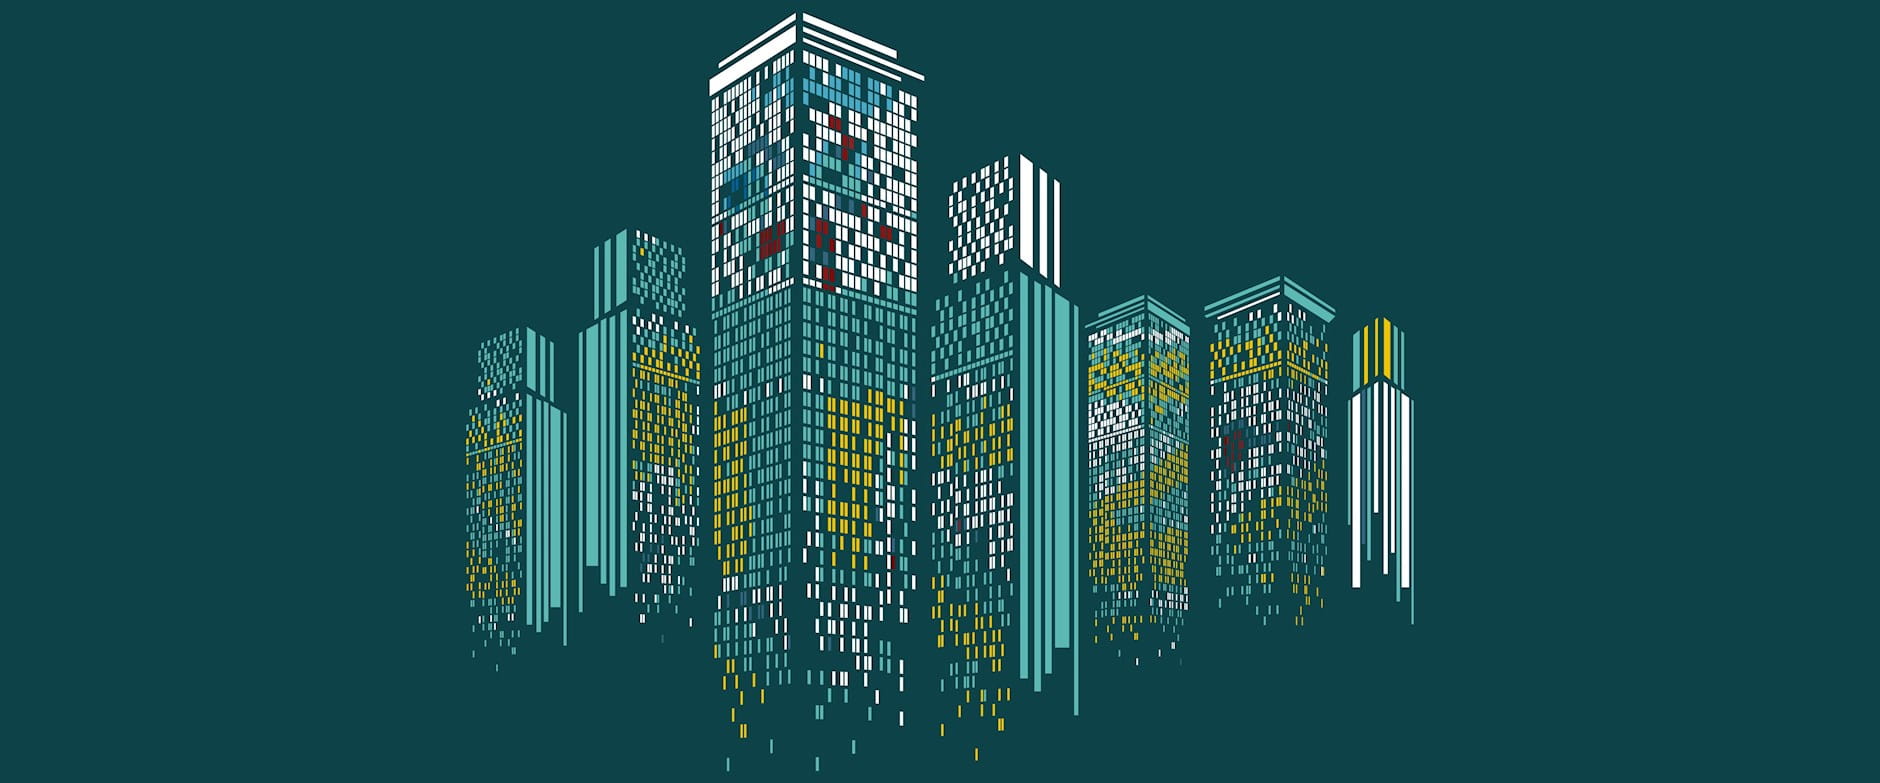 Illustration of skyscrapers with their lights on rising from the bottom